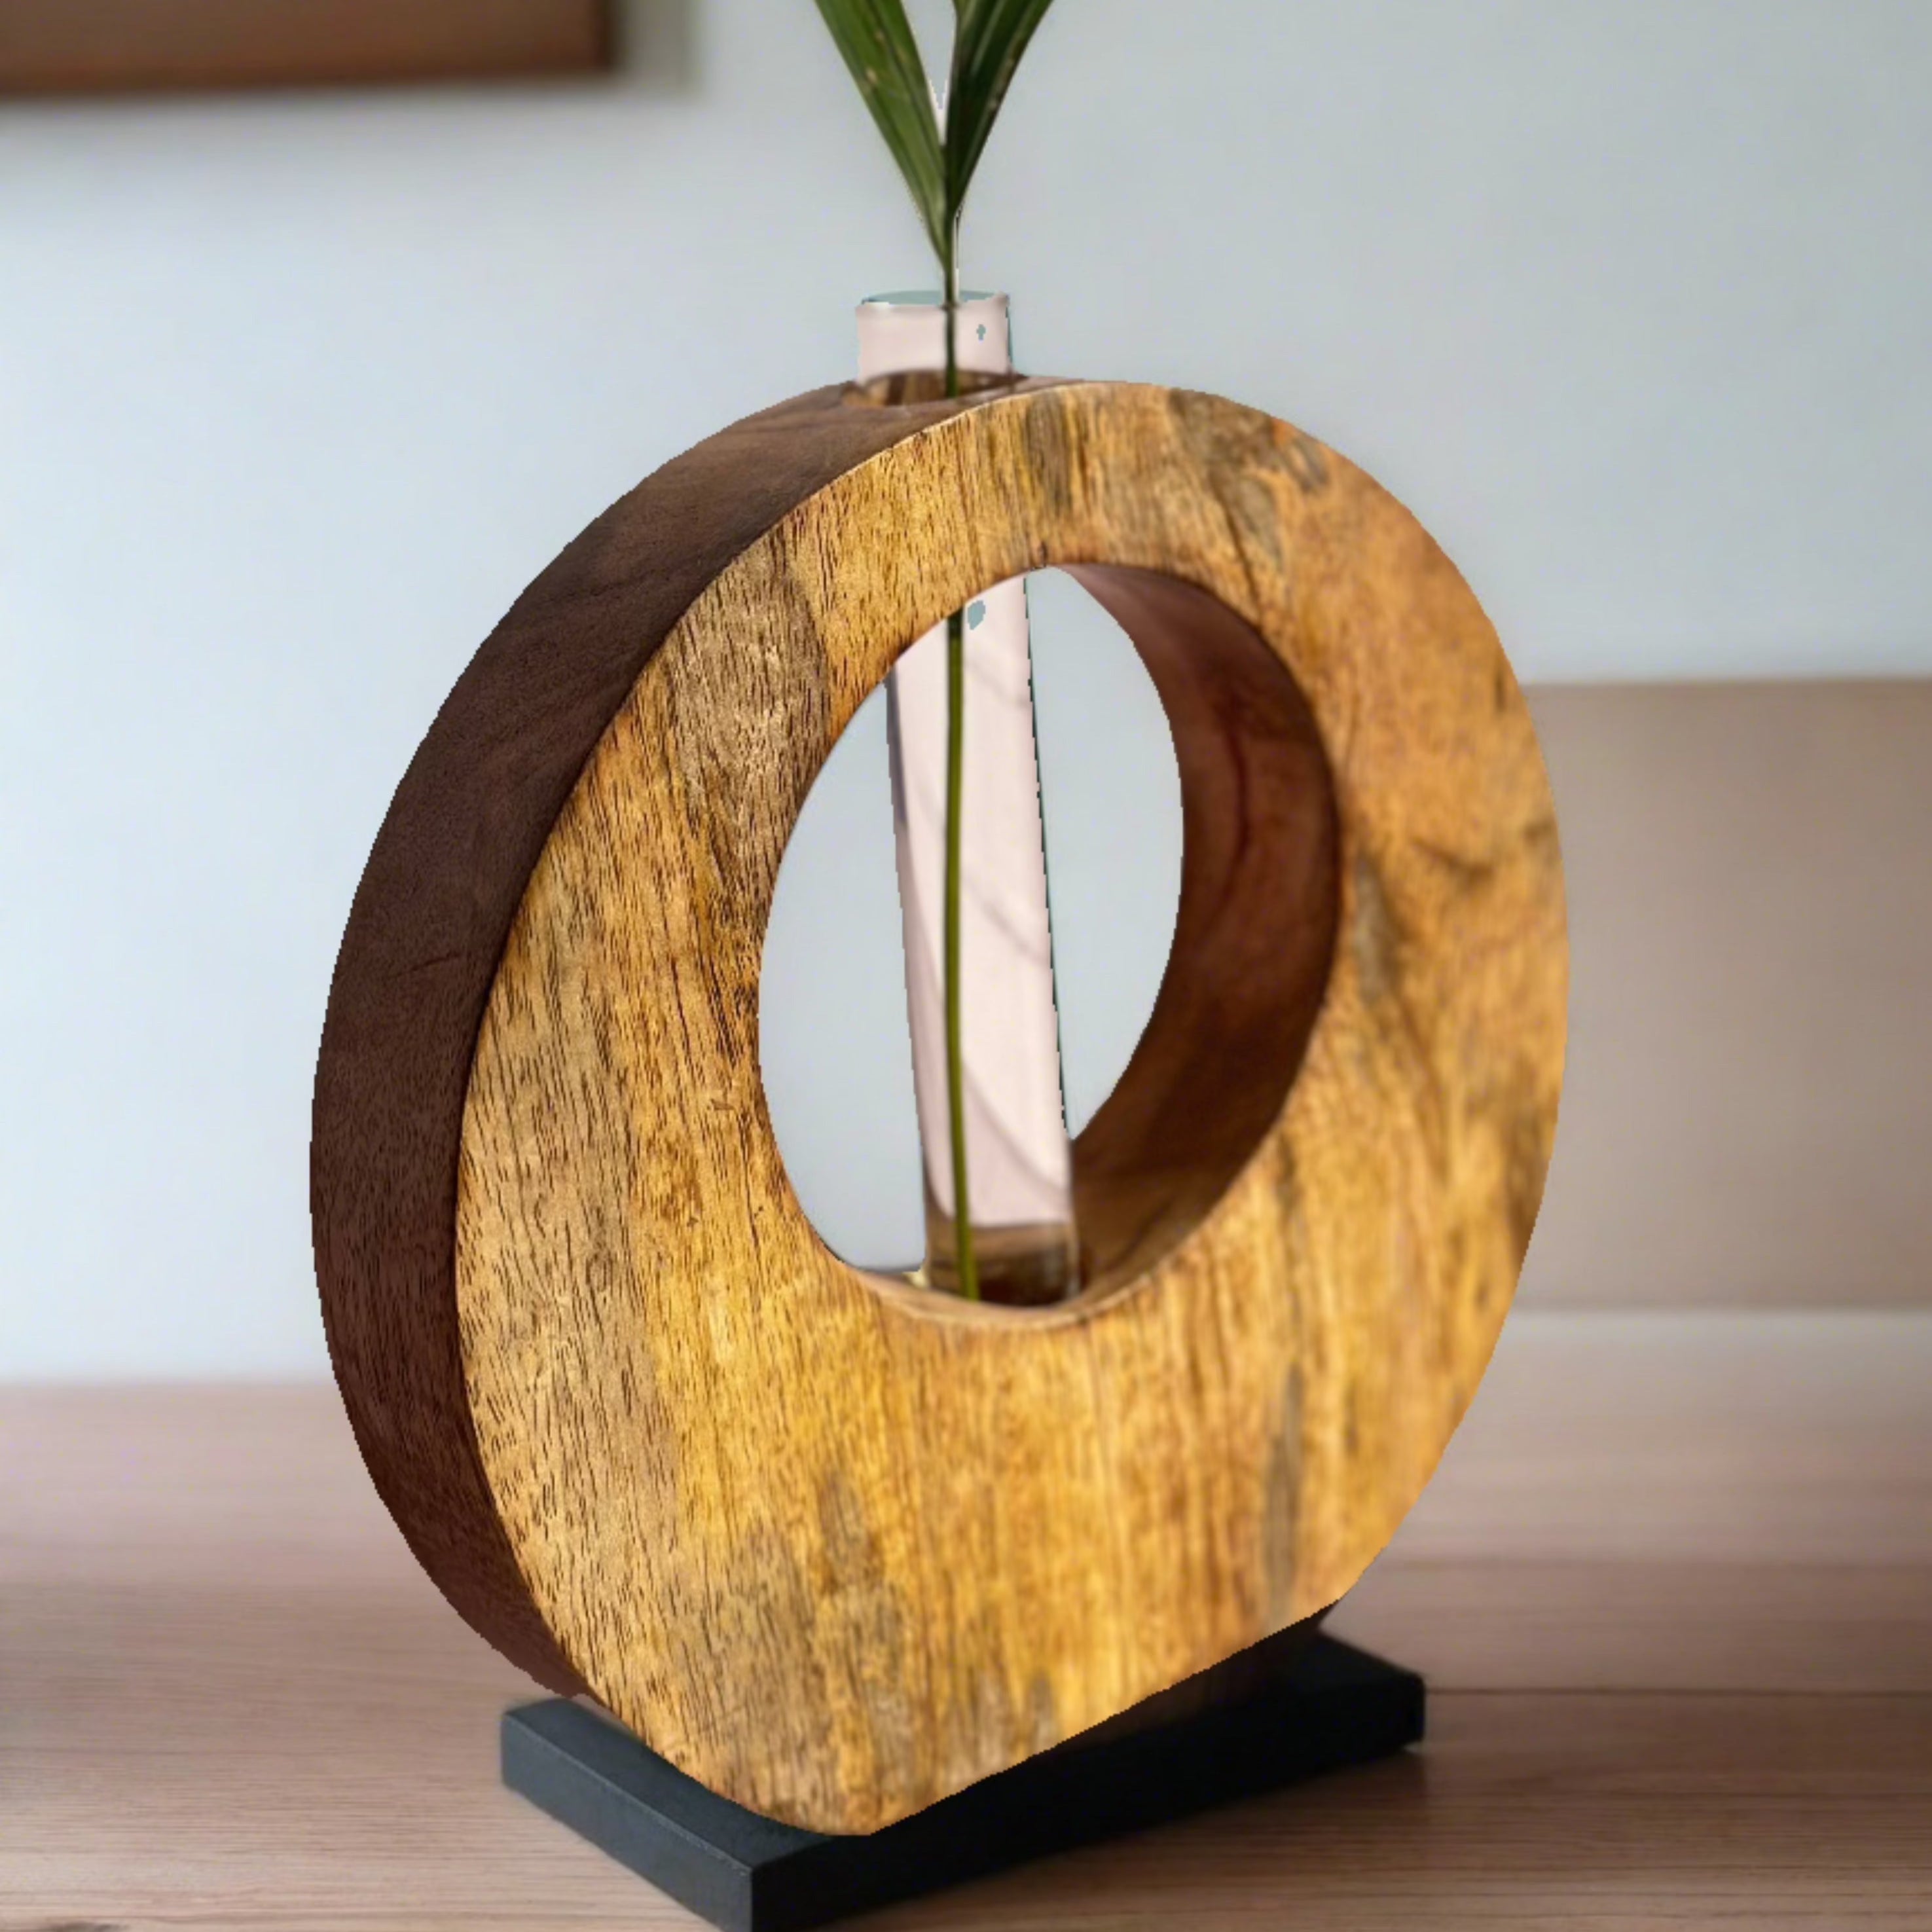 a wooden vase with a plant in it